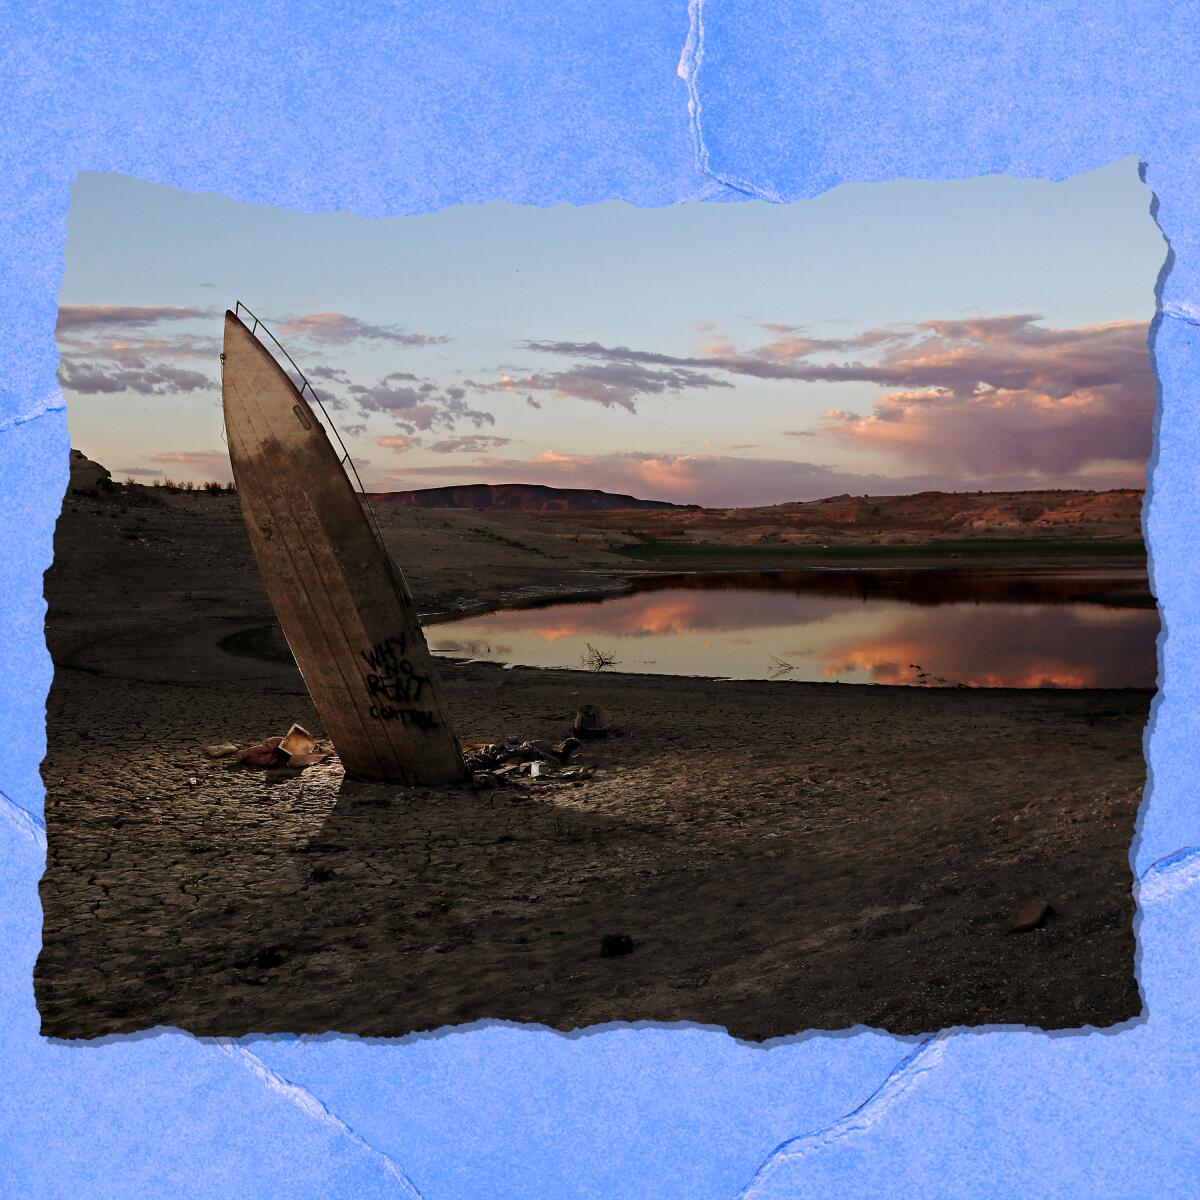 A boat protrudes upward from mud in a nearly dry lake bed.